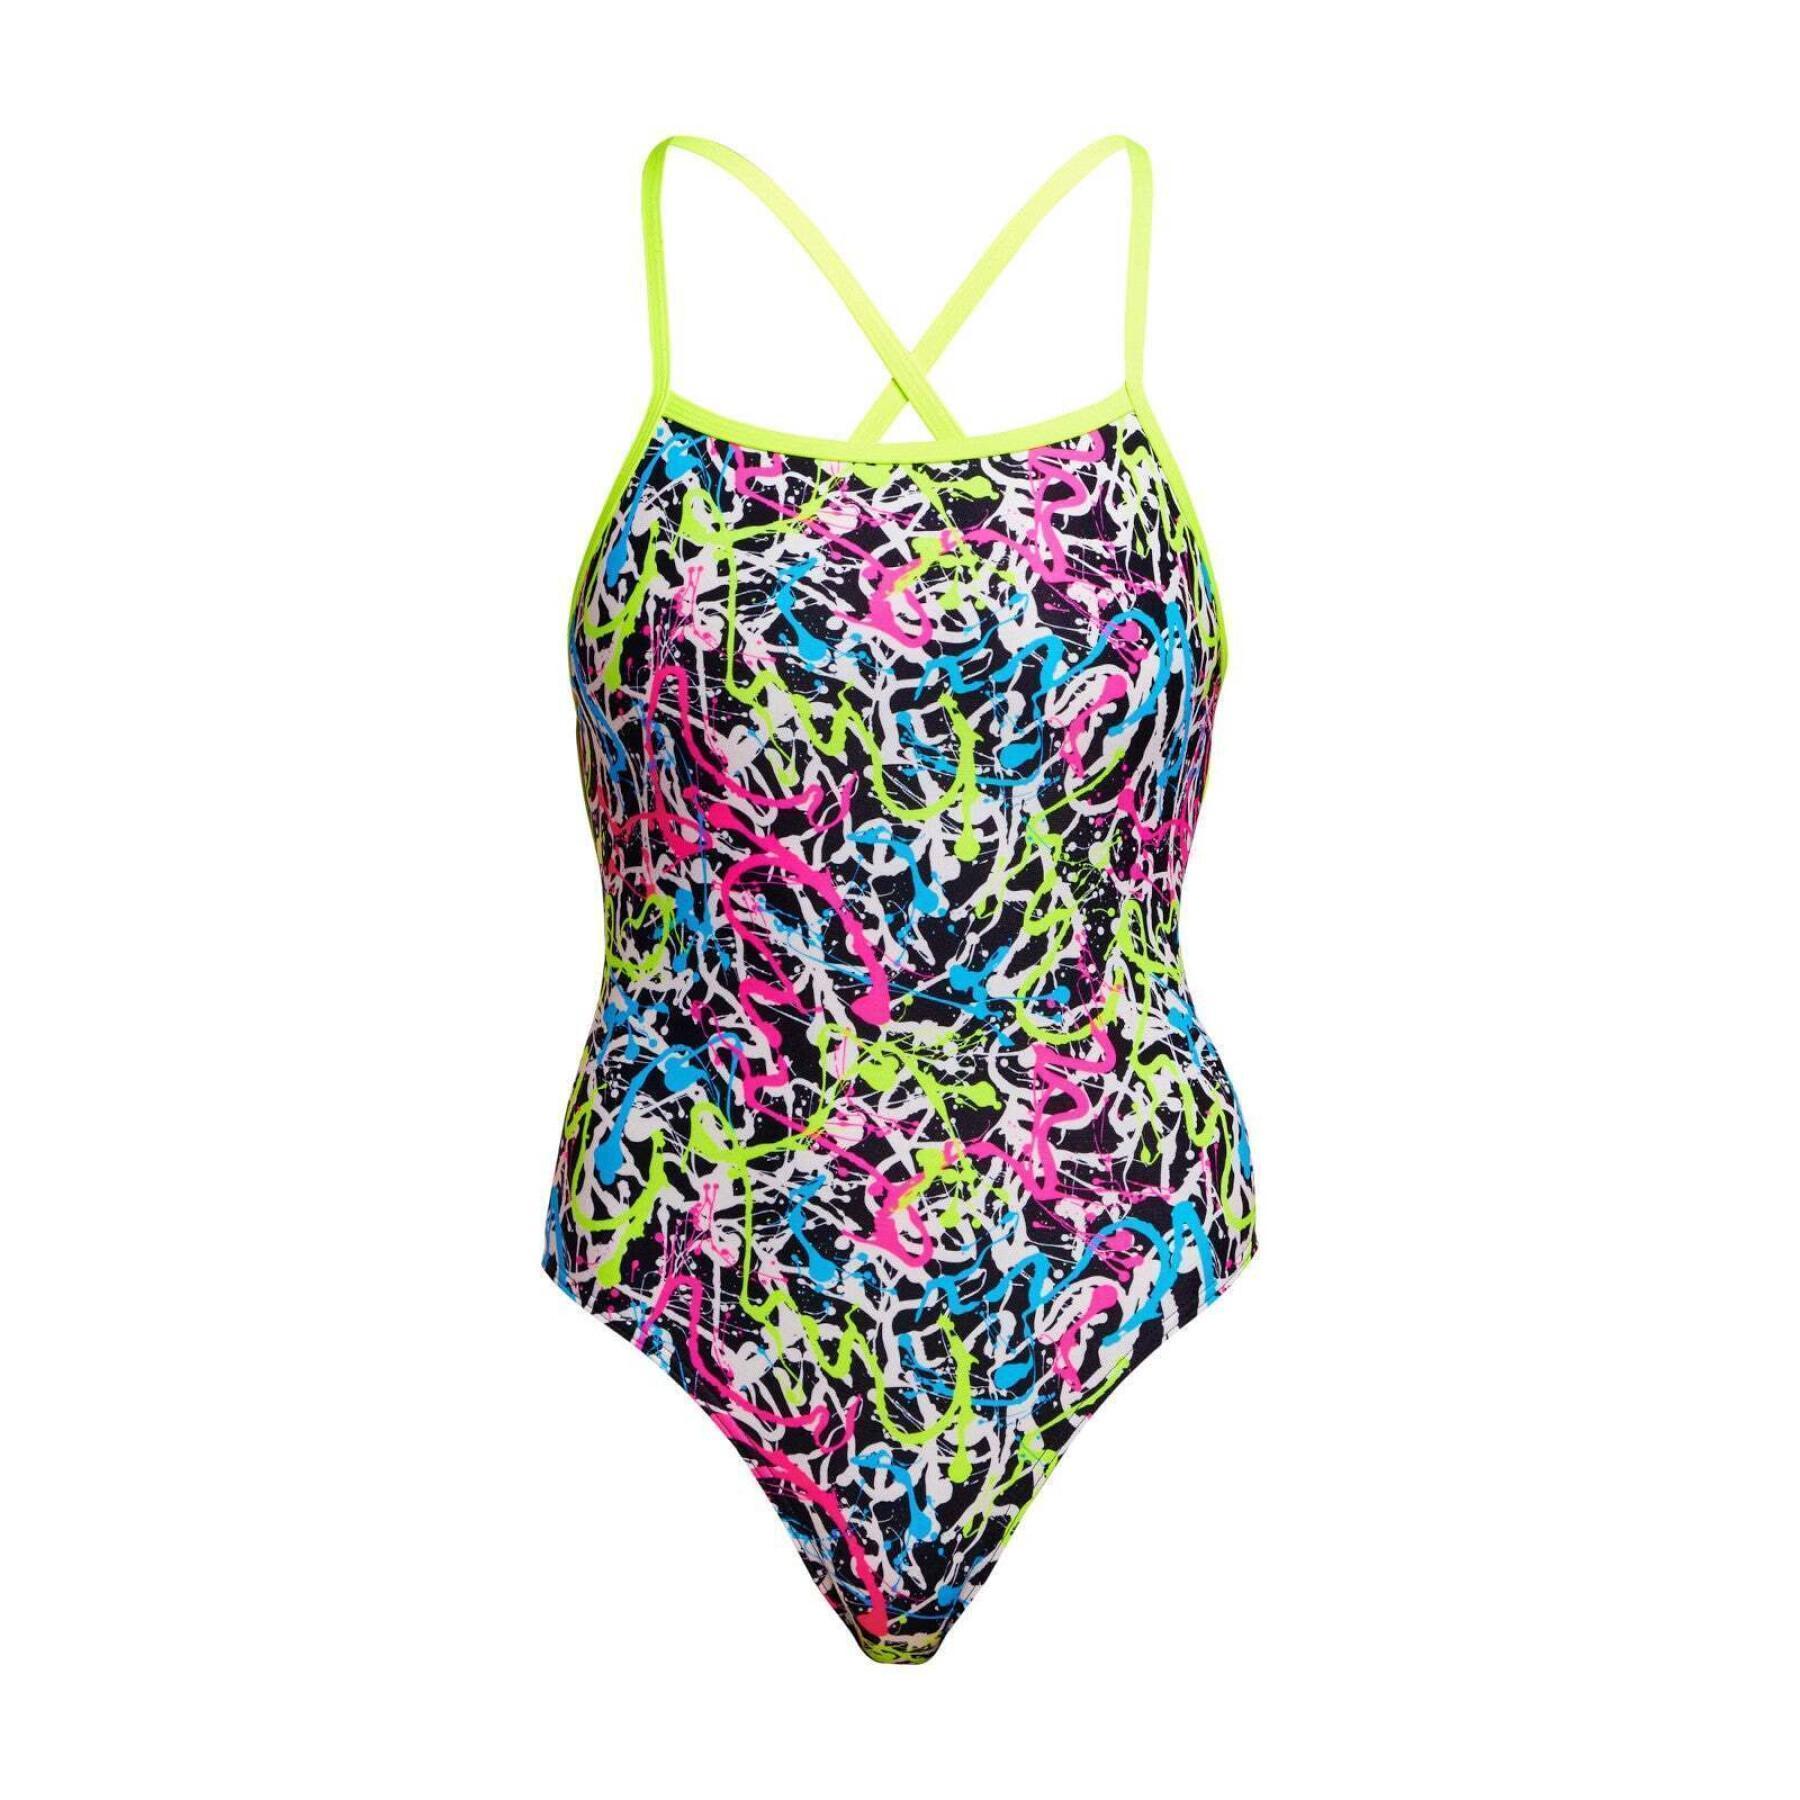 1-piece swimsuit for women Funkita Strapped